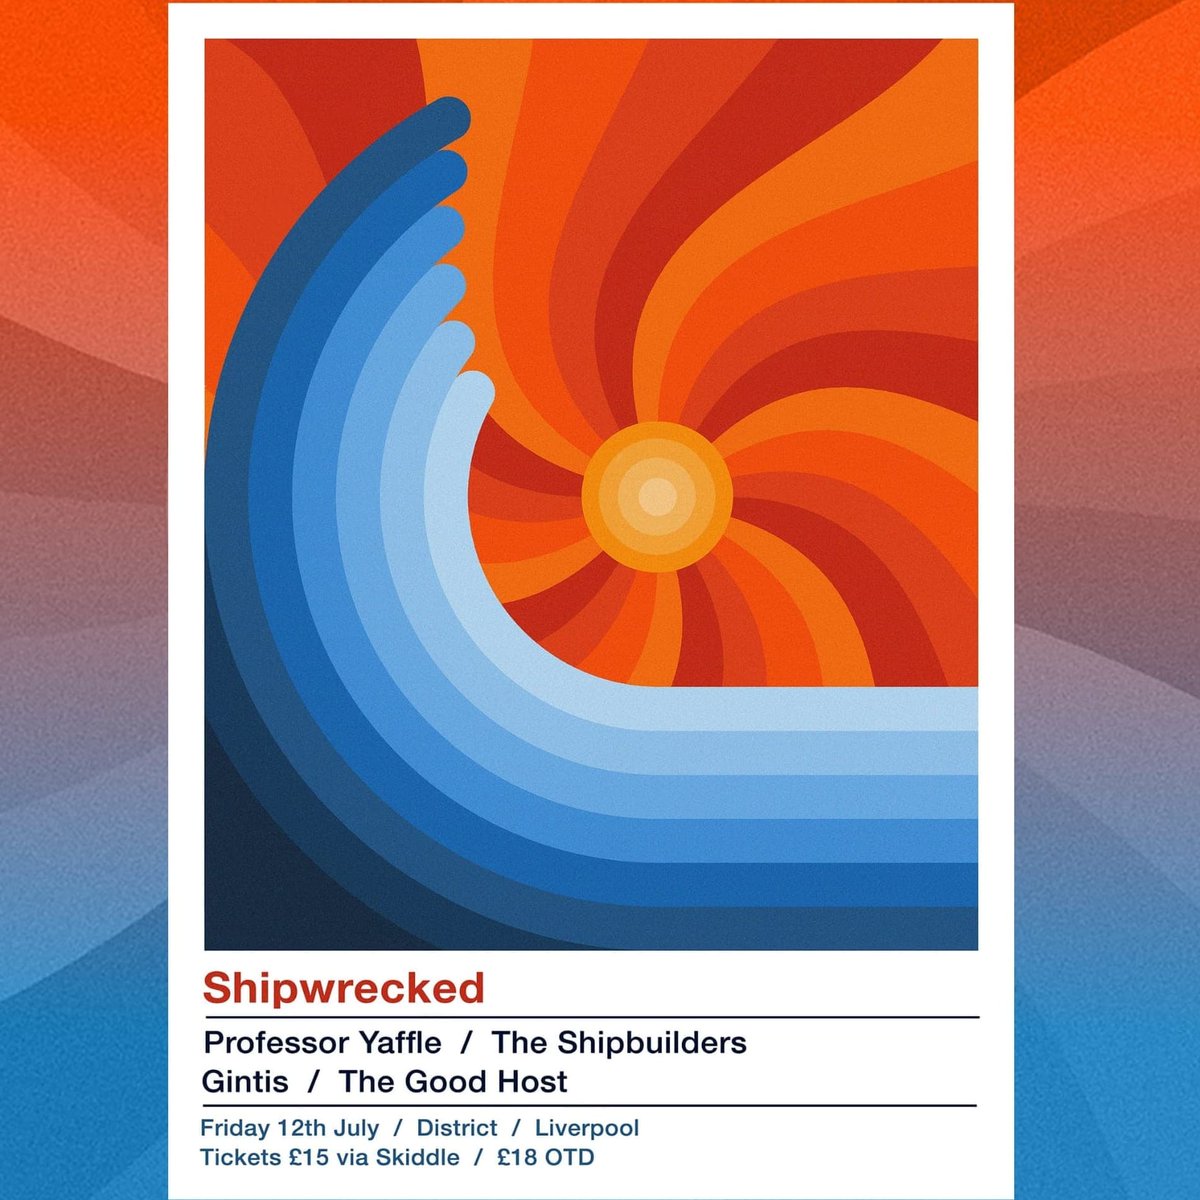 SHIPWRECKED - Low ticket warning

There aren't loads of tickets left for July's extravaganza featuring @ToffeeYaffle, @TheShipbuilders, @Gintismusic & @TheGoodHostBand, so we'd advise haste..

skiddle.com/whats-on/Liver…

🎑